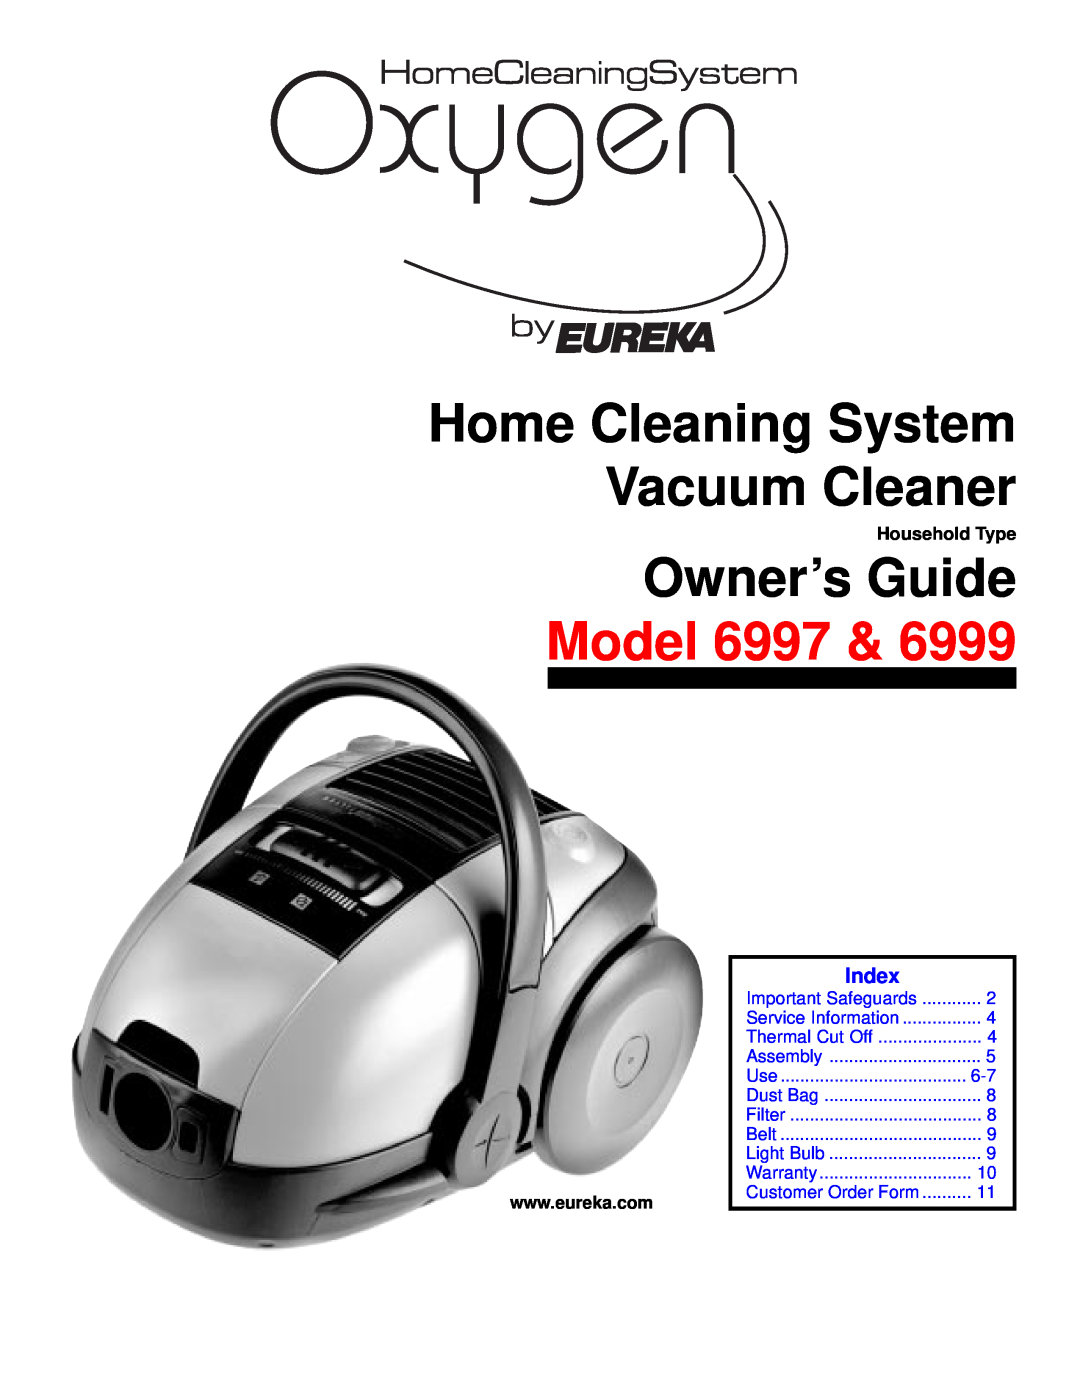 Lance Industries 6997, 6999 warranty Home Cleaning System Vacuum Cleaner, Owner’s Guide, Model, Index, Household Type 